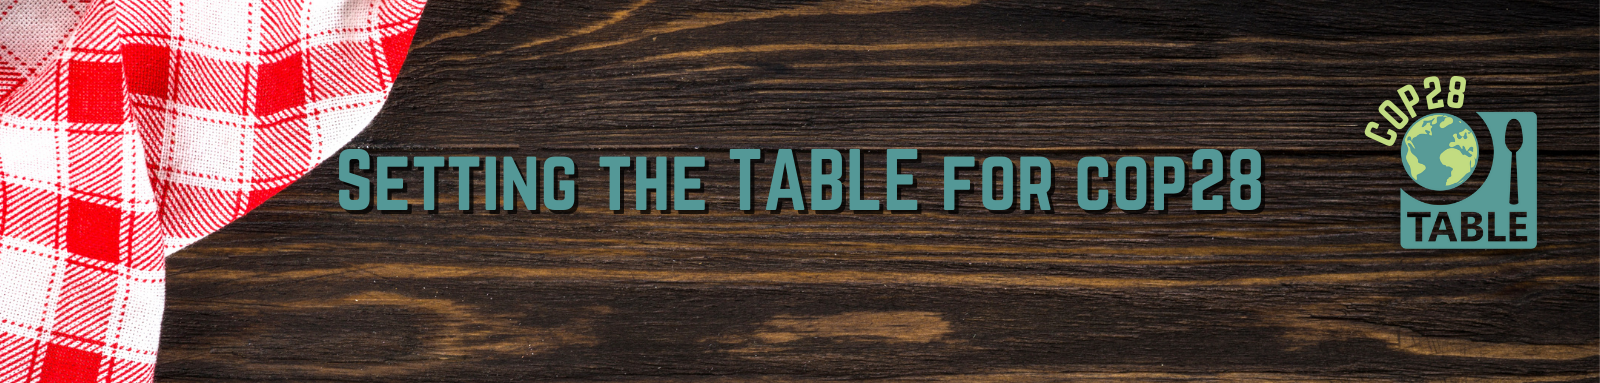 The banner image for the event series "Setting the TABLE for COP28" with TABLE's logo and a table and tablecloth underneath the text.